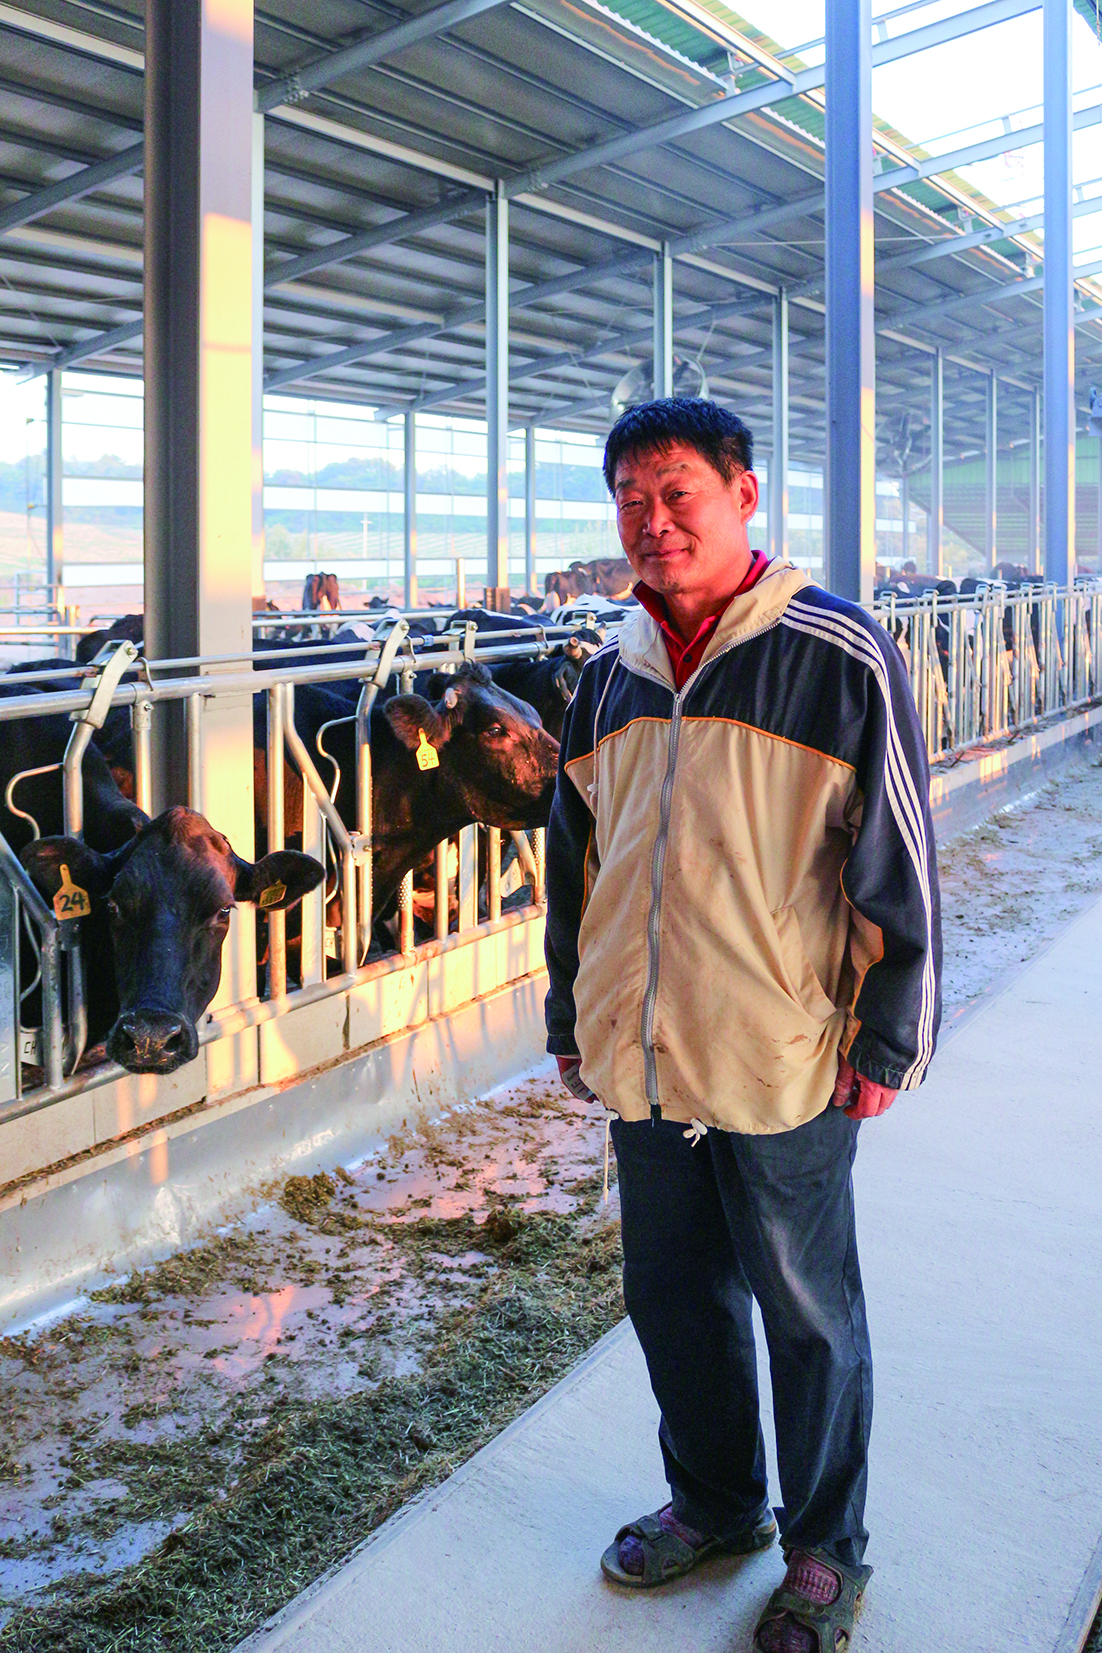 Mr. Fan uses EM to maintain his own health, not just the cows.